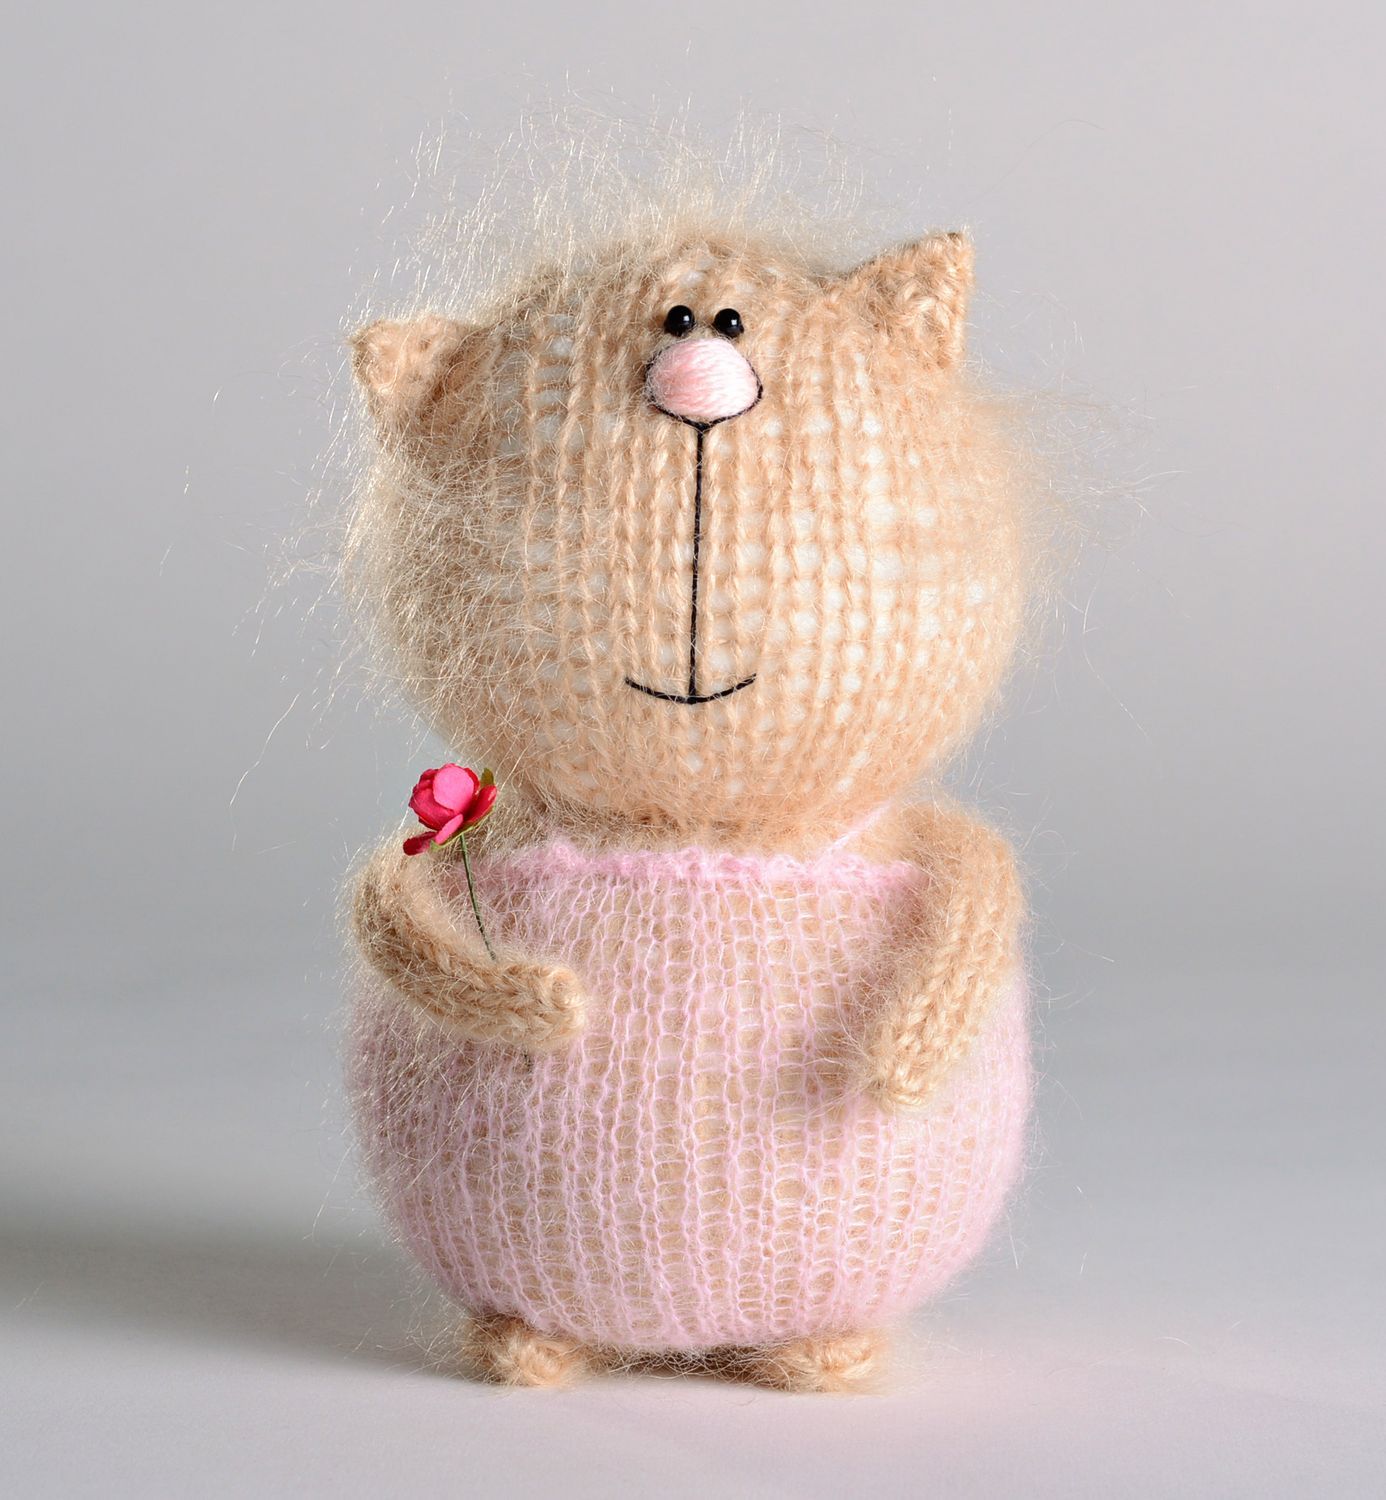 Hand knitted toy photo 5